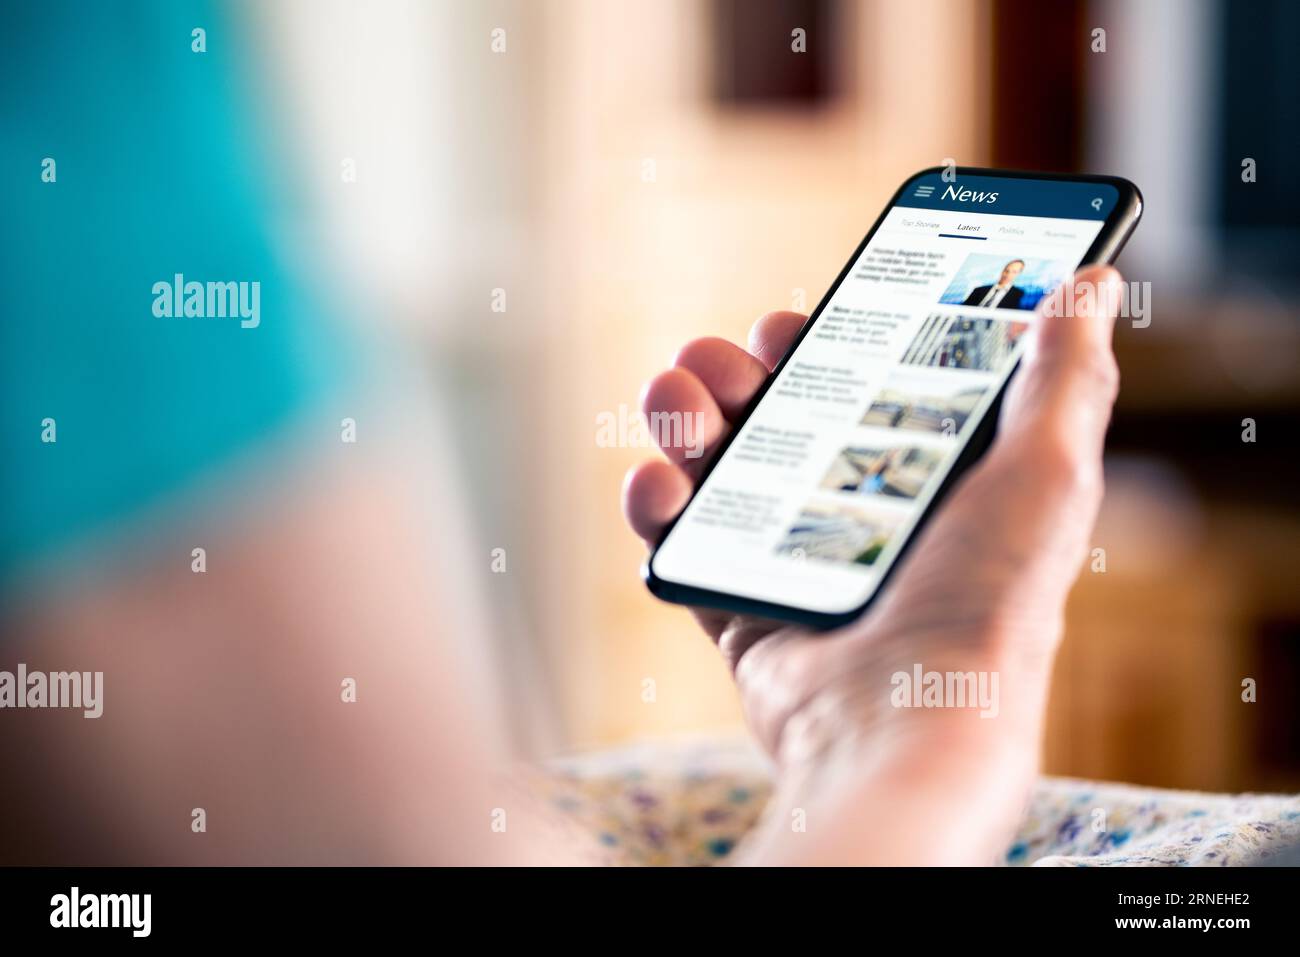 News online. Mobile phone screen. Senior woman reading newspaper on web portal and website. Latest daily information. Headlines on internet. Stock Photo